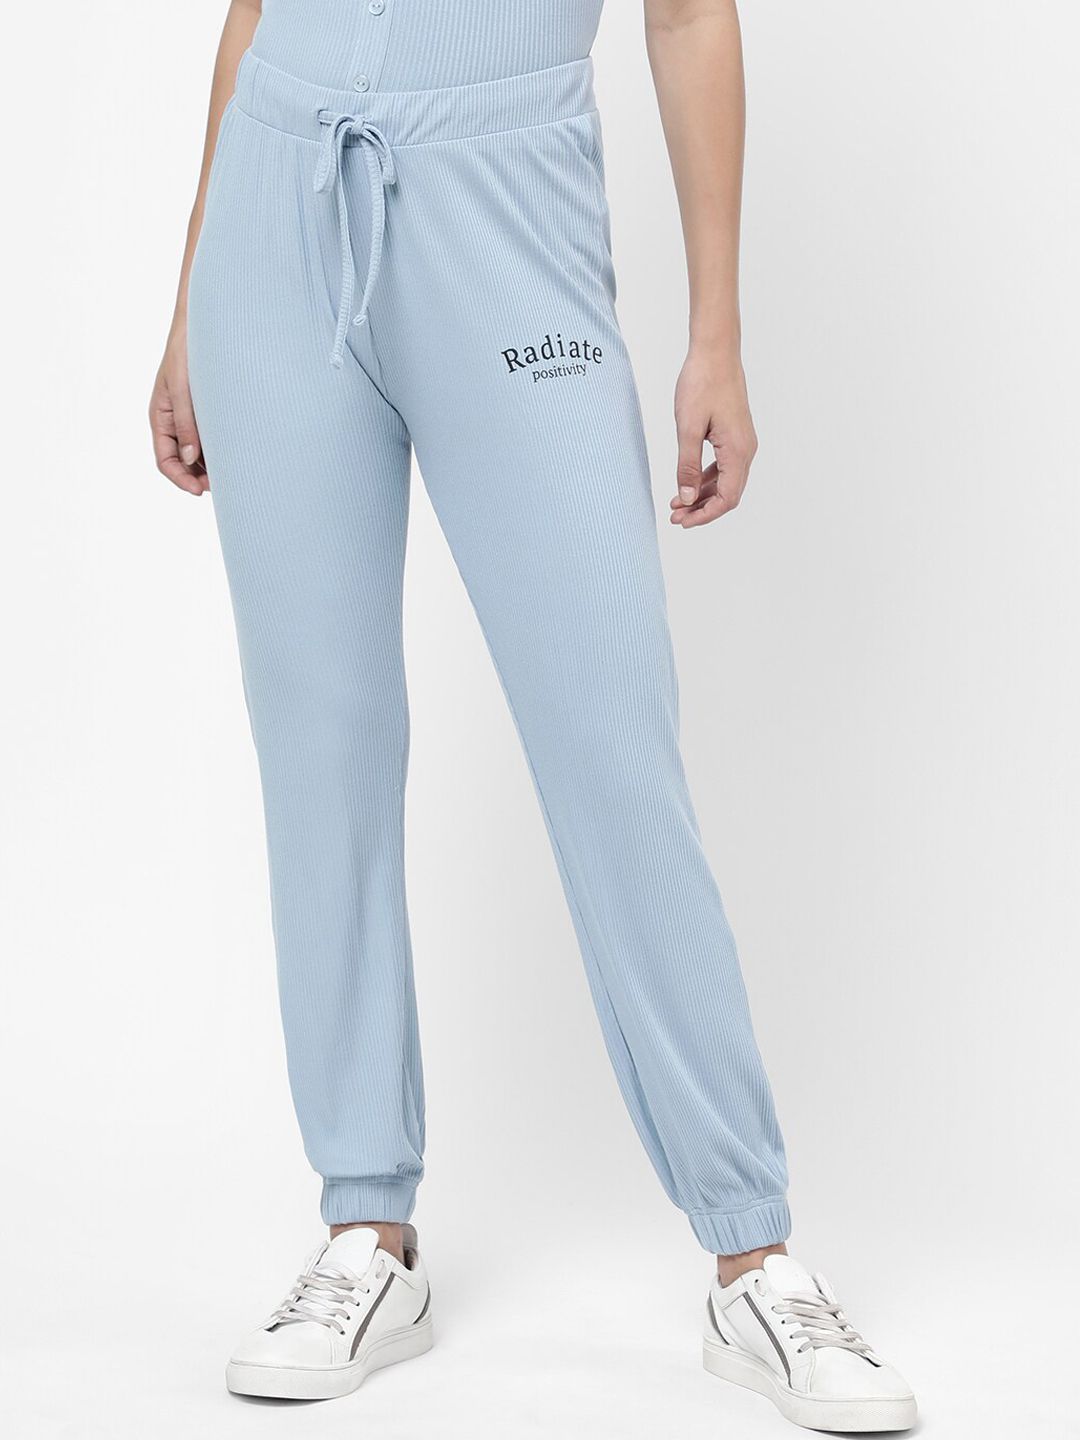 R&B Women Blue Joggers Trousers Price in India